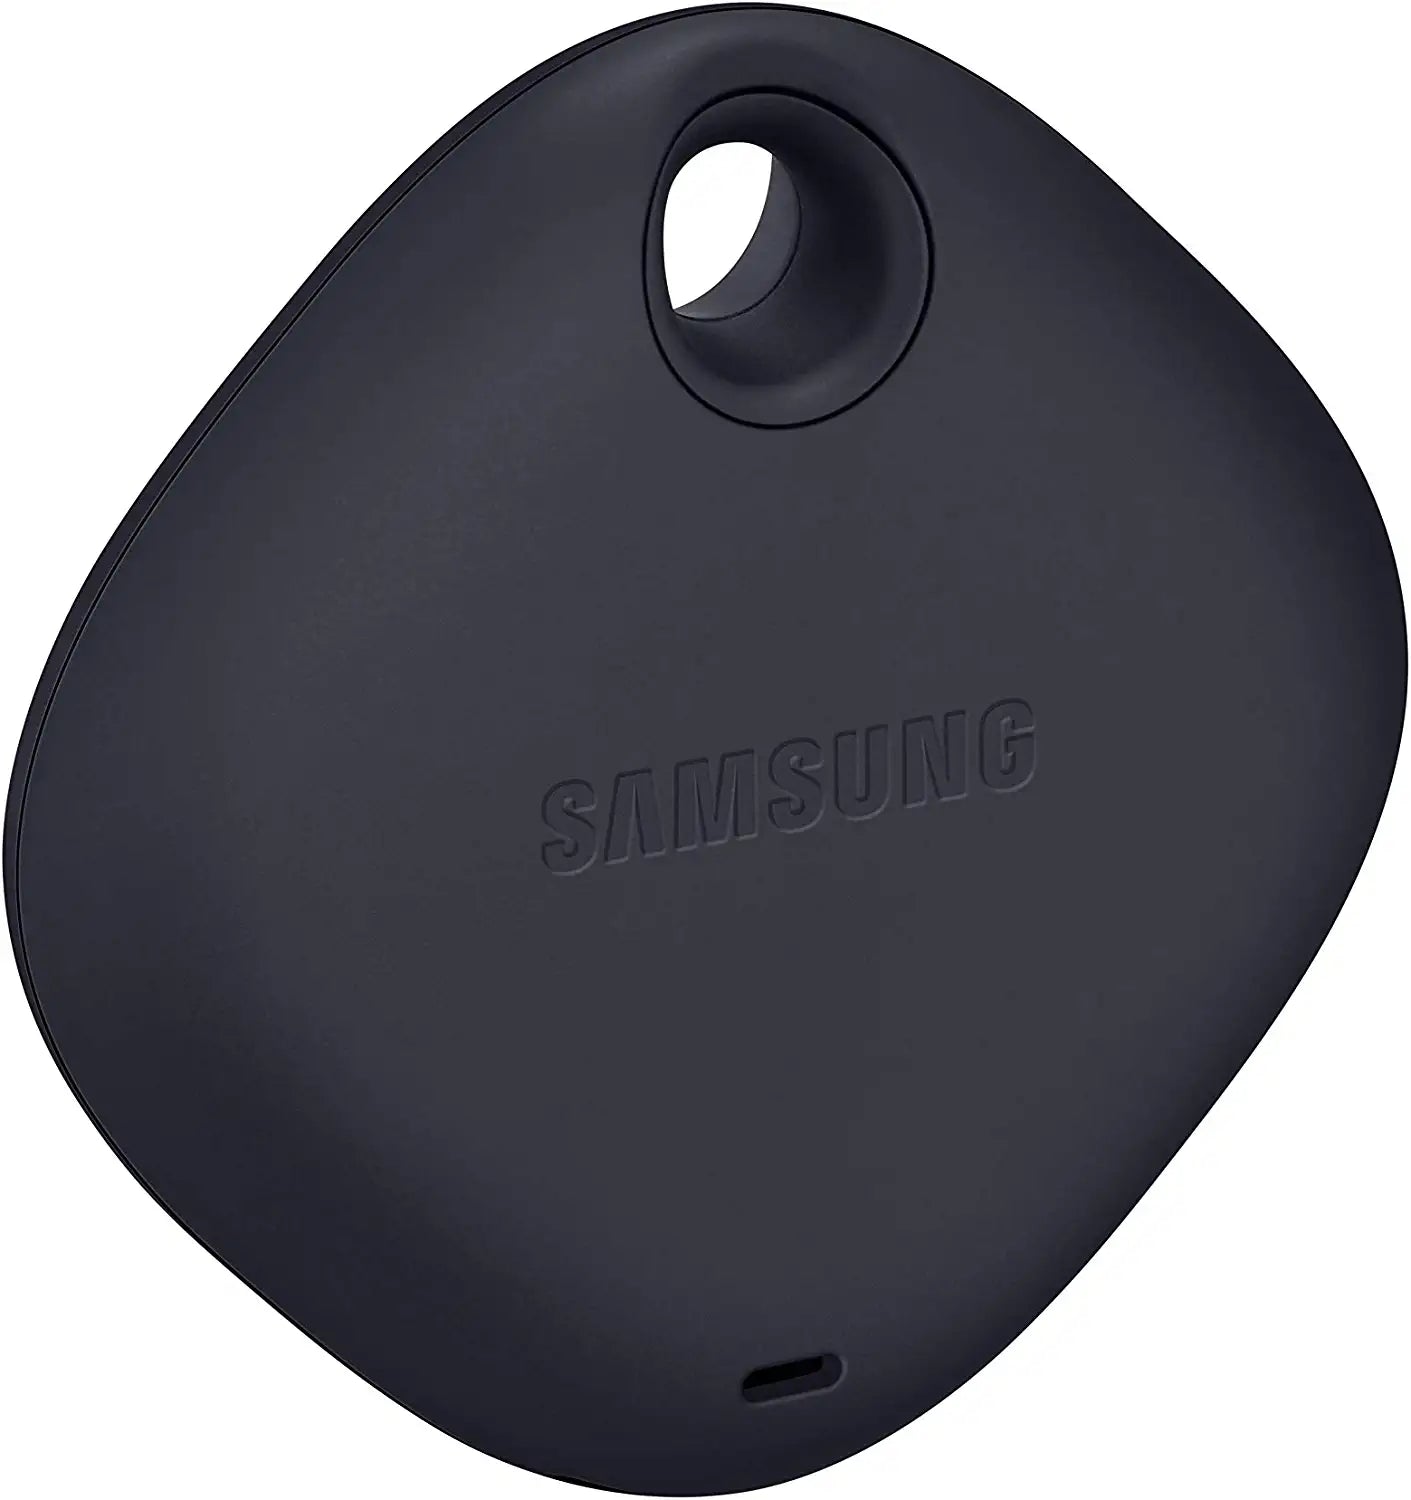 SAMSUNG Galaxy Smarttag Bluetooth Smart Home Accessory Tracker, Attachment Locator for Lost Keys, Bag, Wallet, Luggage, Pets, Glasses, 2021, US Version, Black